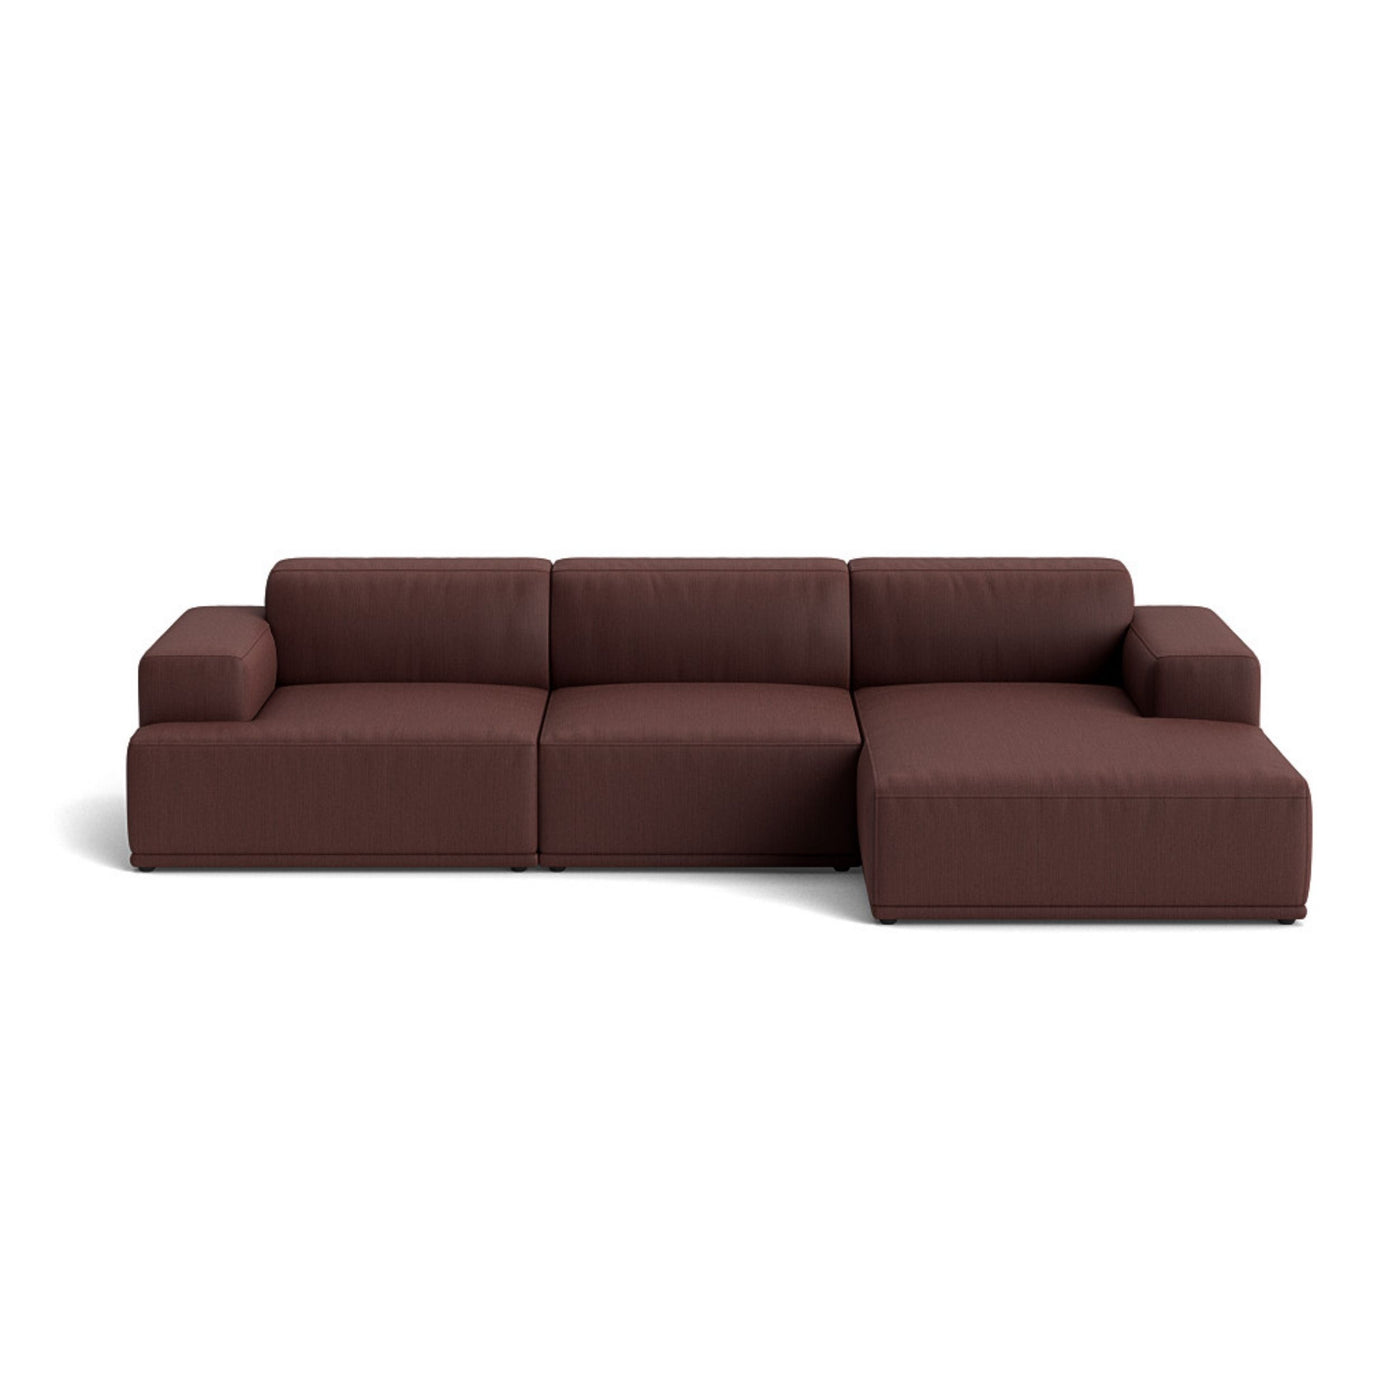 Muuto Connect Soft Modular 3 Seater Sofa, configuration 3. Made-to-order from someday designs. #colour_balder-382